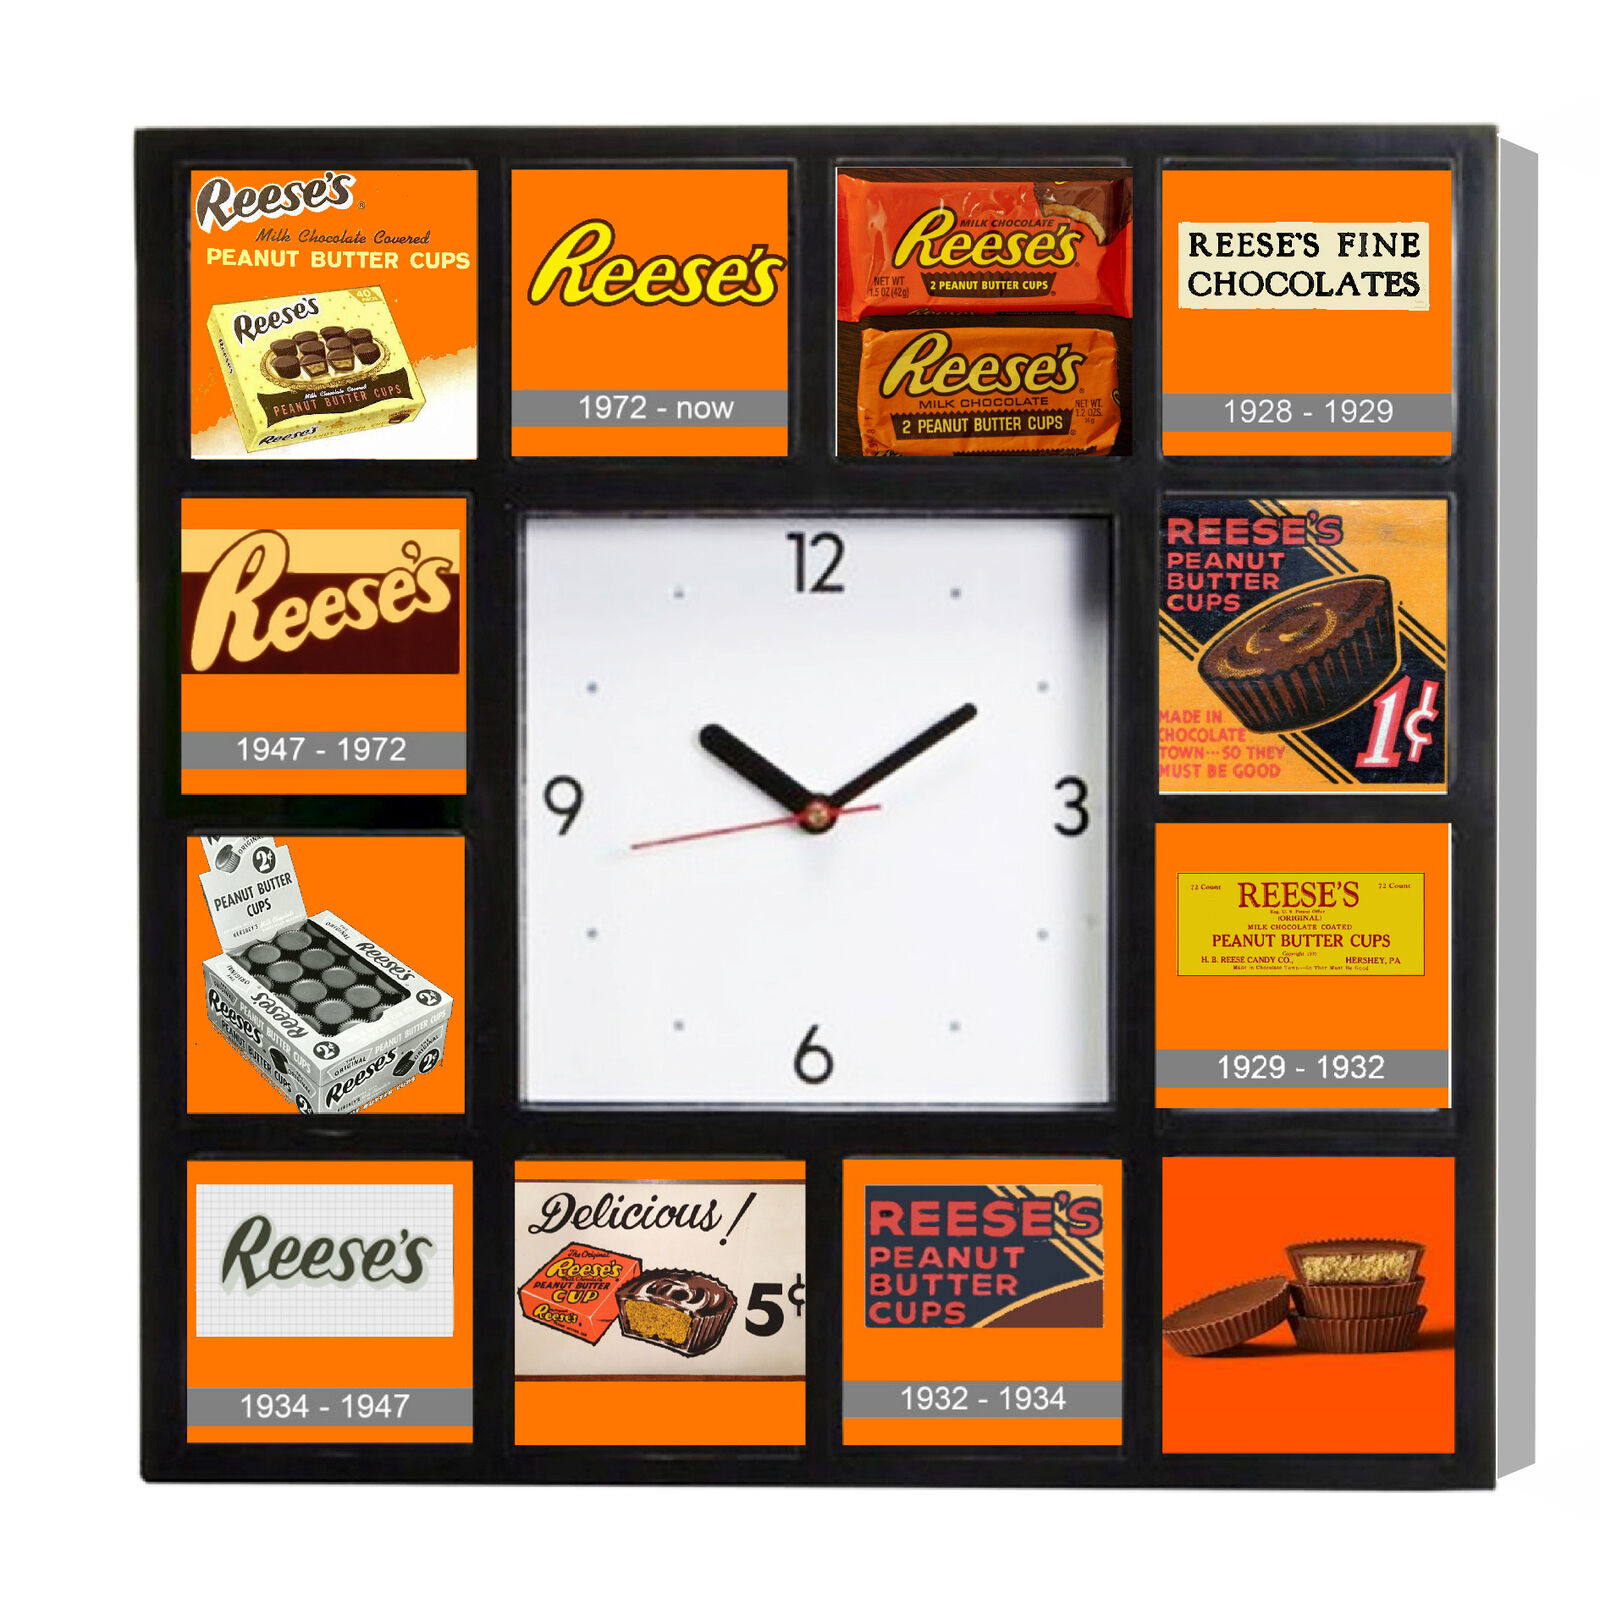 Reese's Peanut Butter Cup retro history ad Clock with 12 pictures